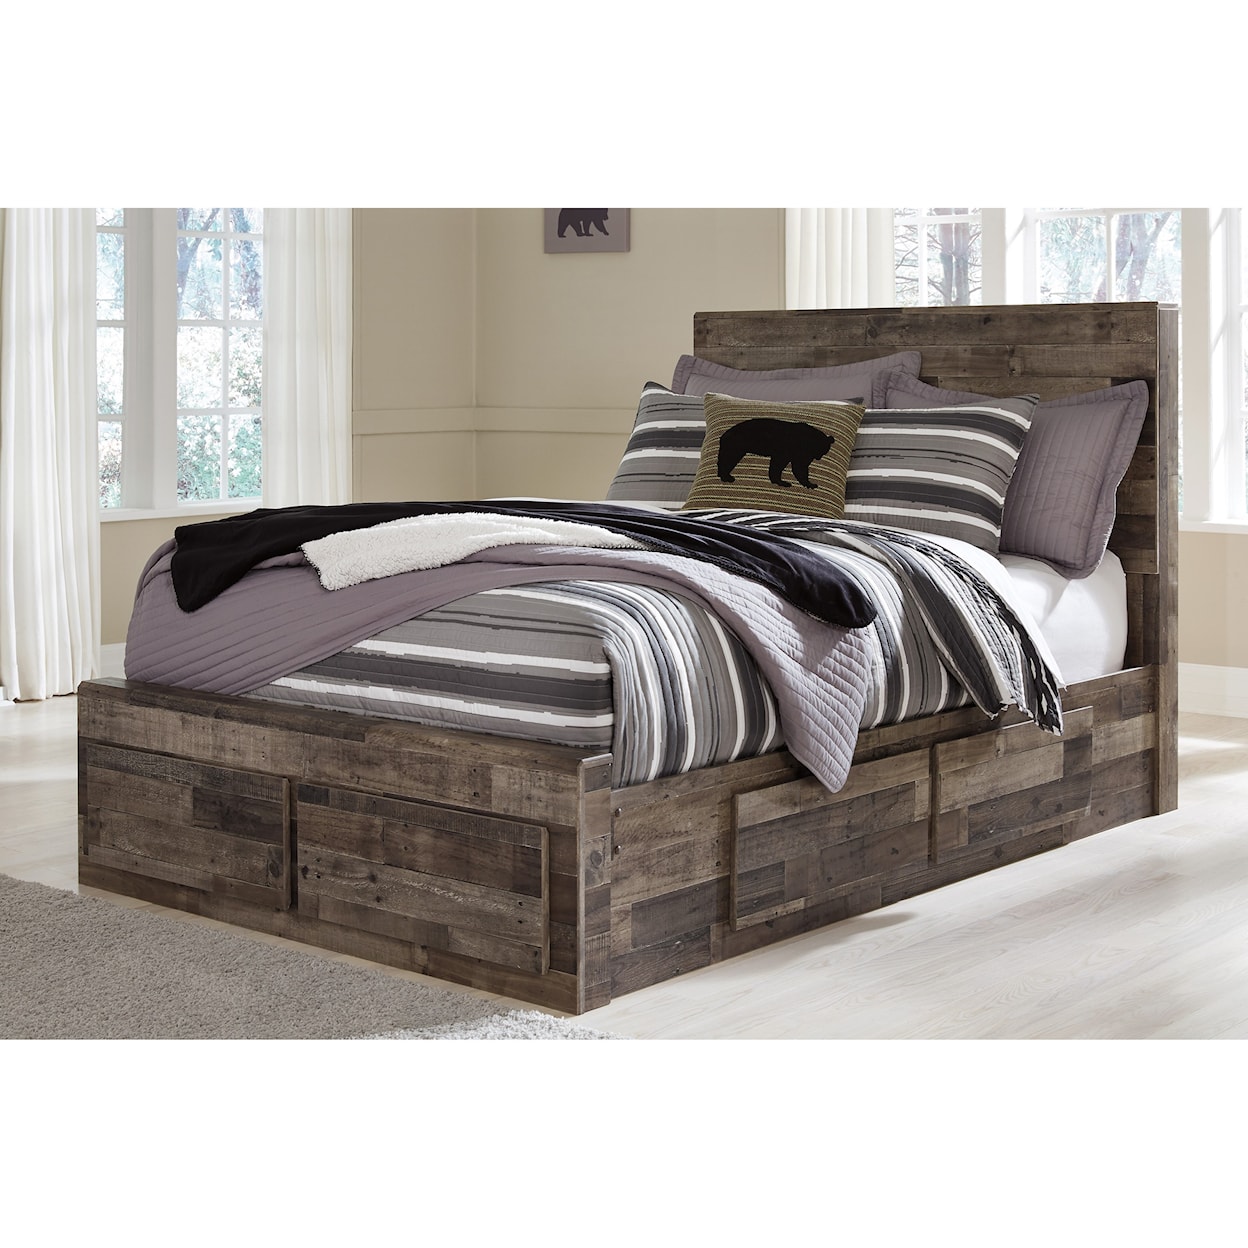 Benchcraft by Ashley Derekson Full Storage Bed with 6 Drawers